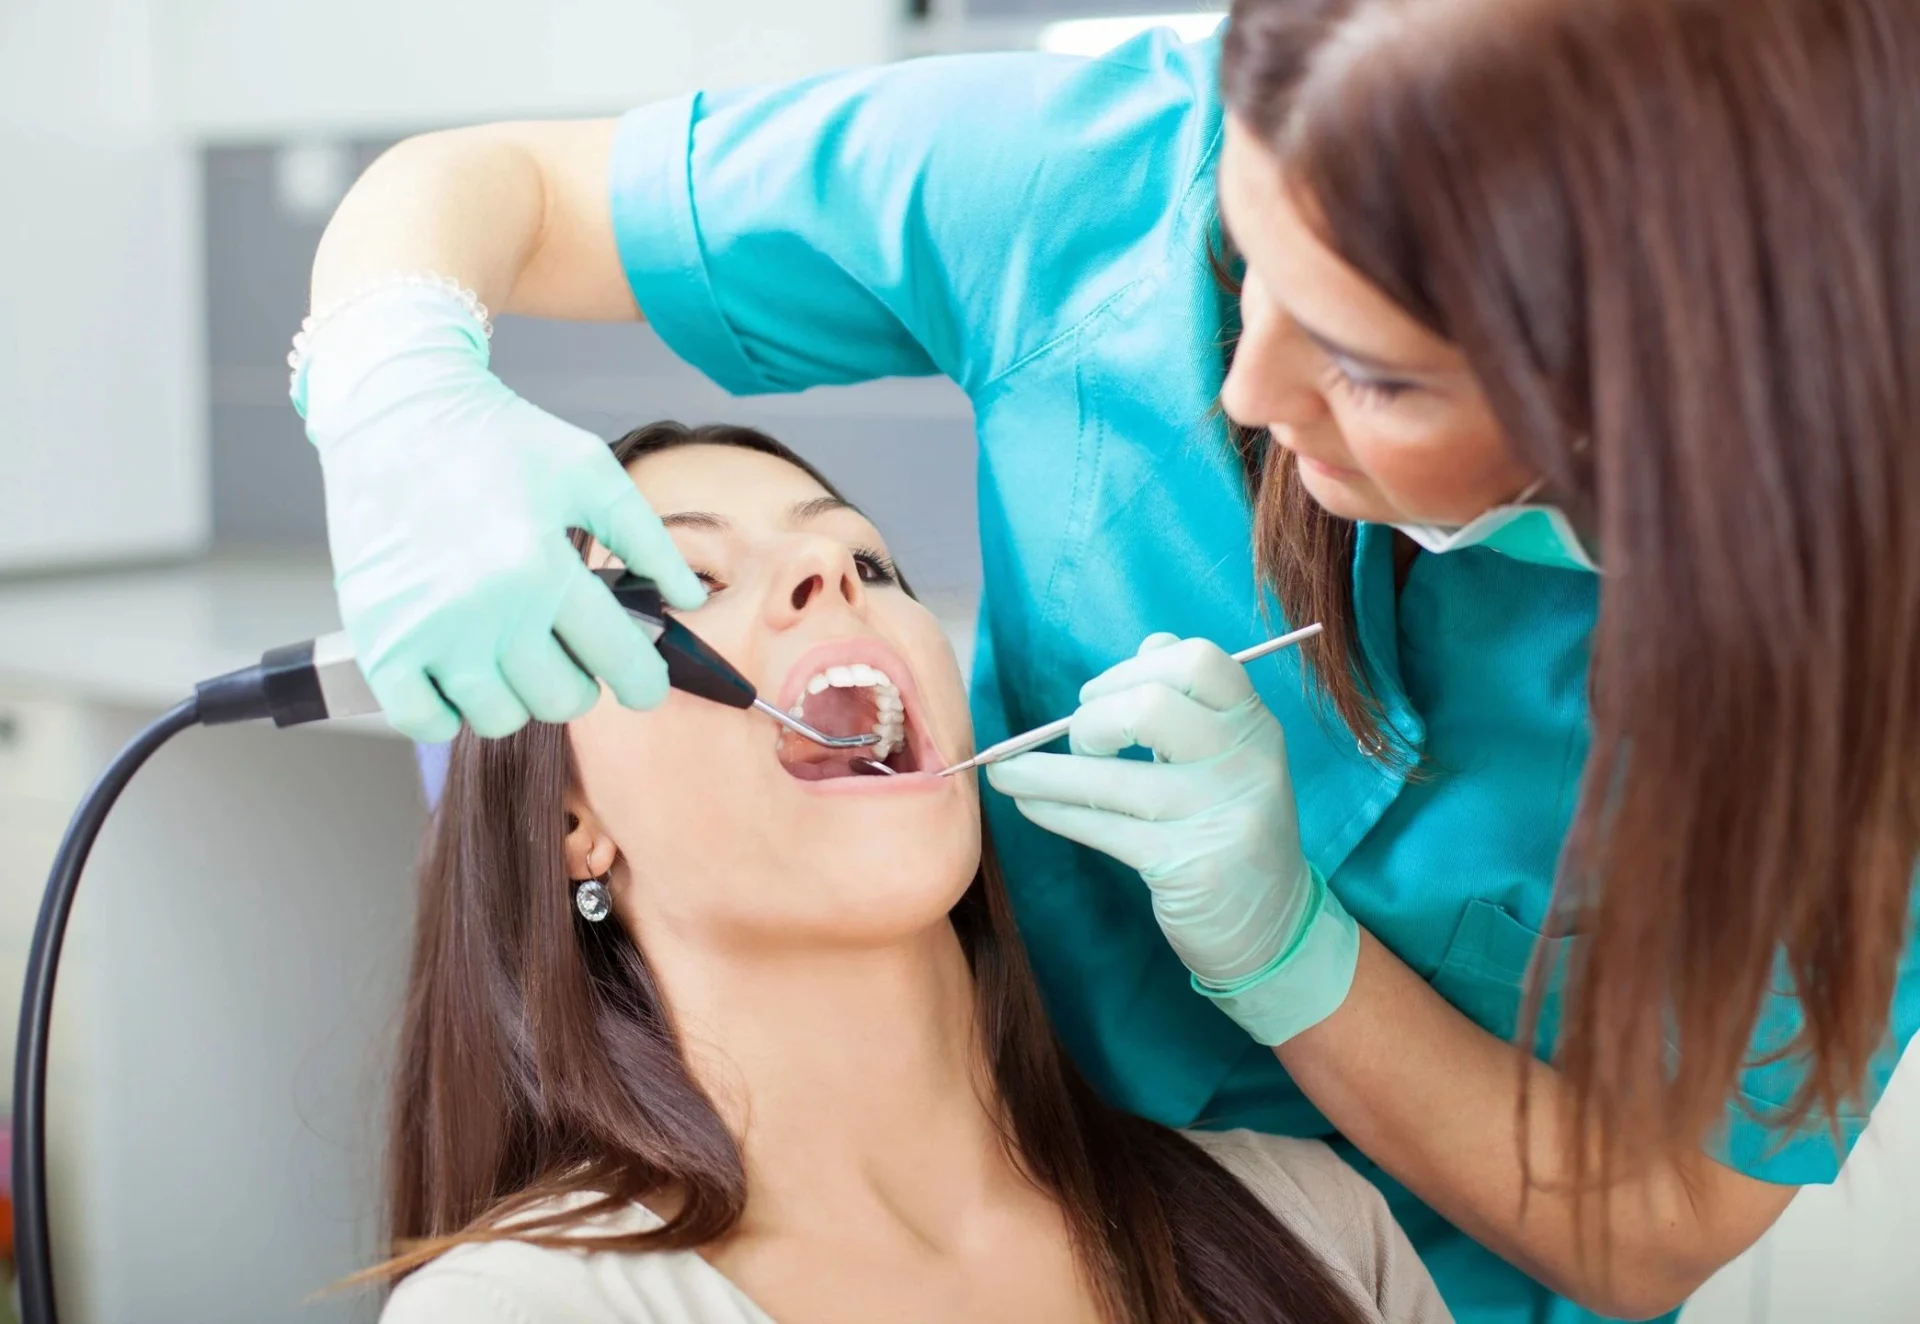 A woman getting her teeth checked by an dentist.